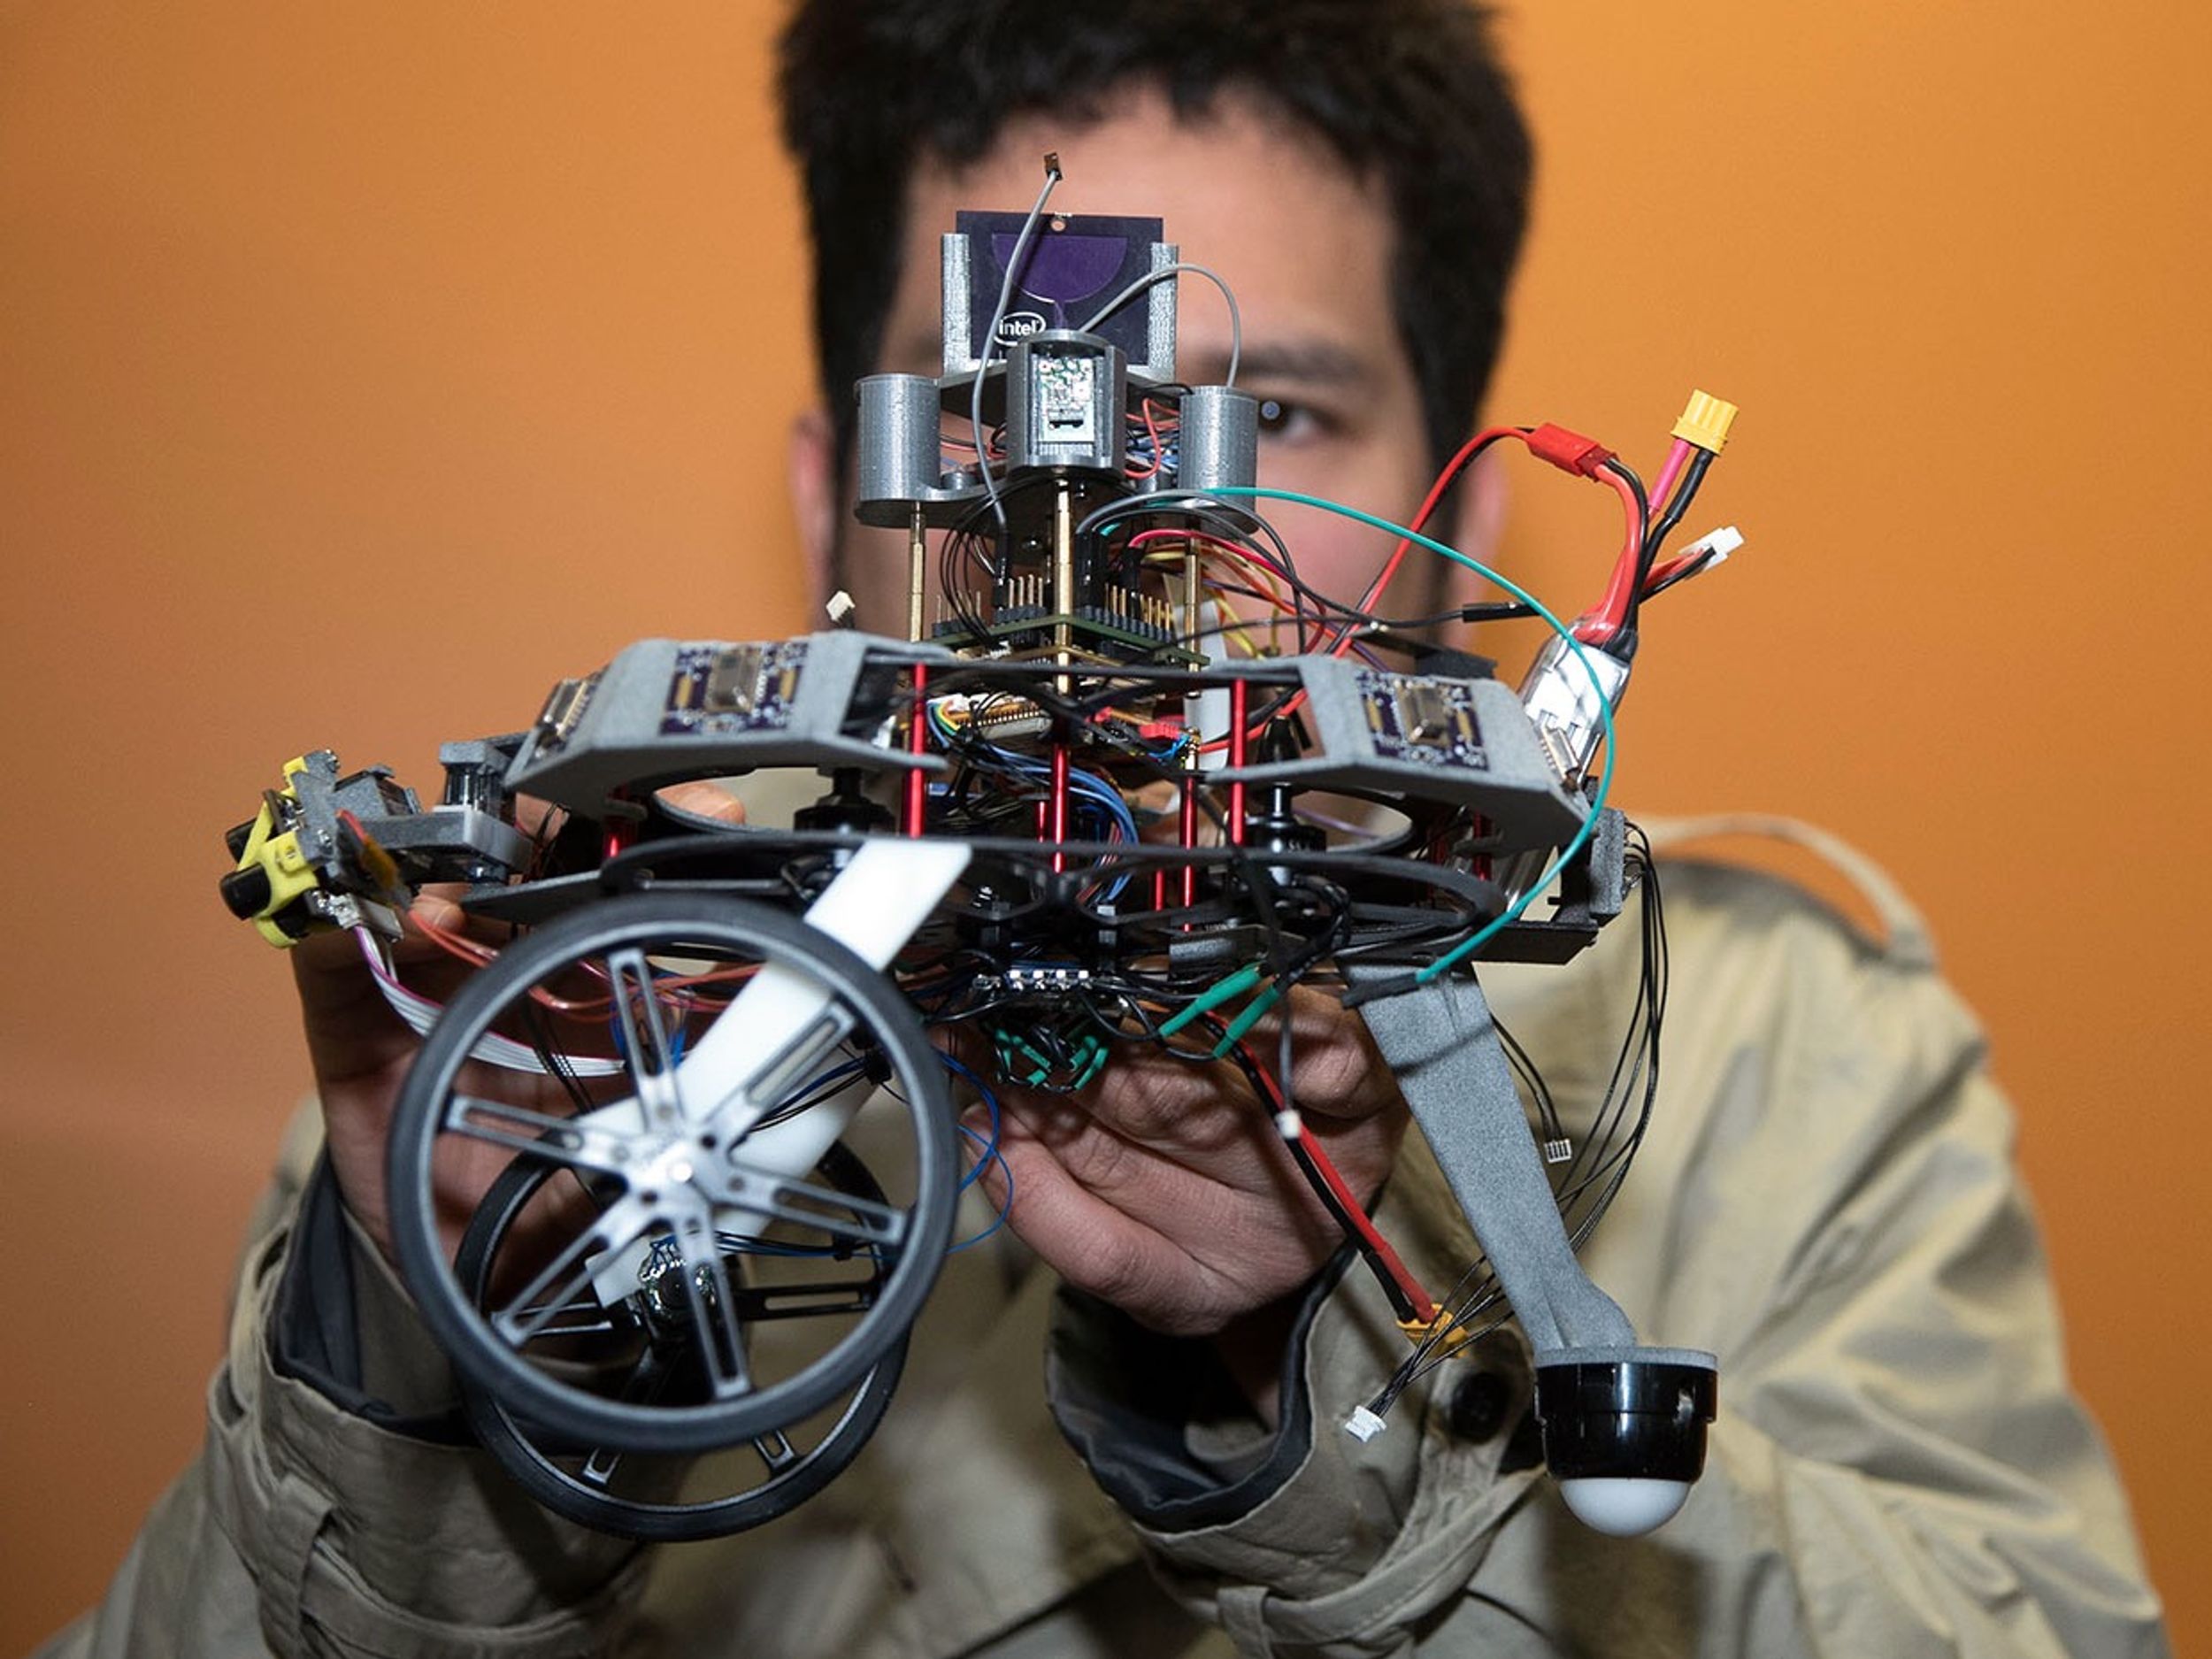 Intel and academic groups are designing specialized hardware to speed path planning and other aspects of robot coordination